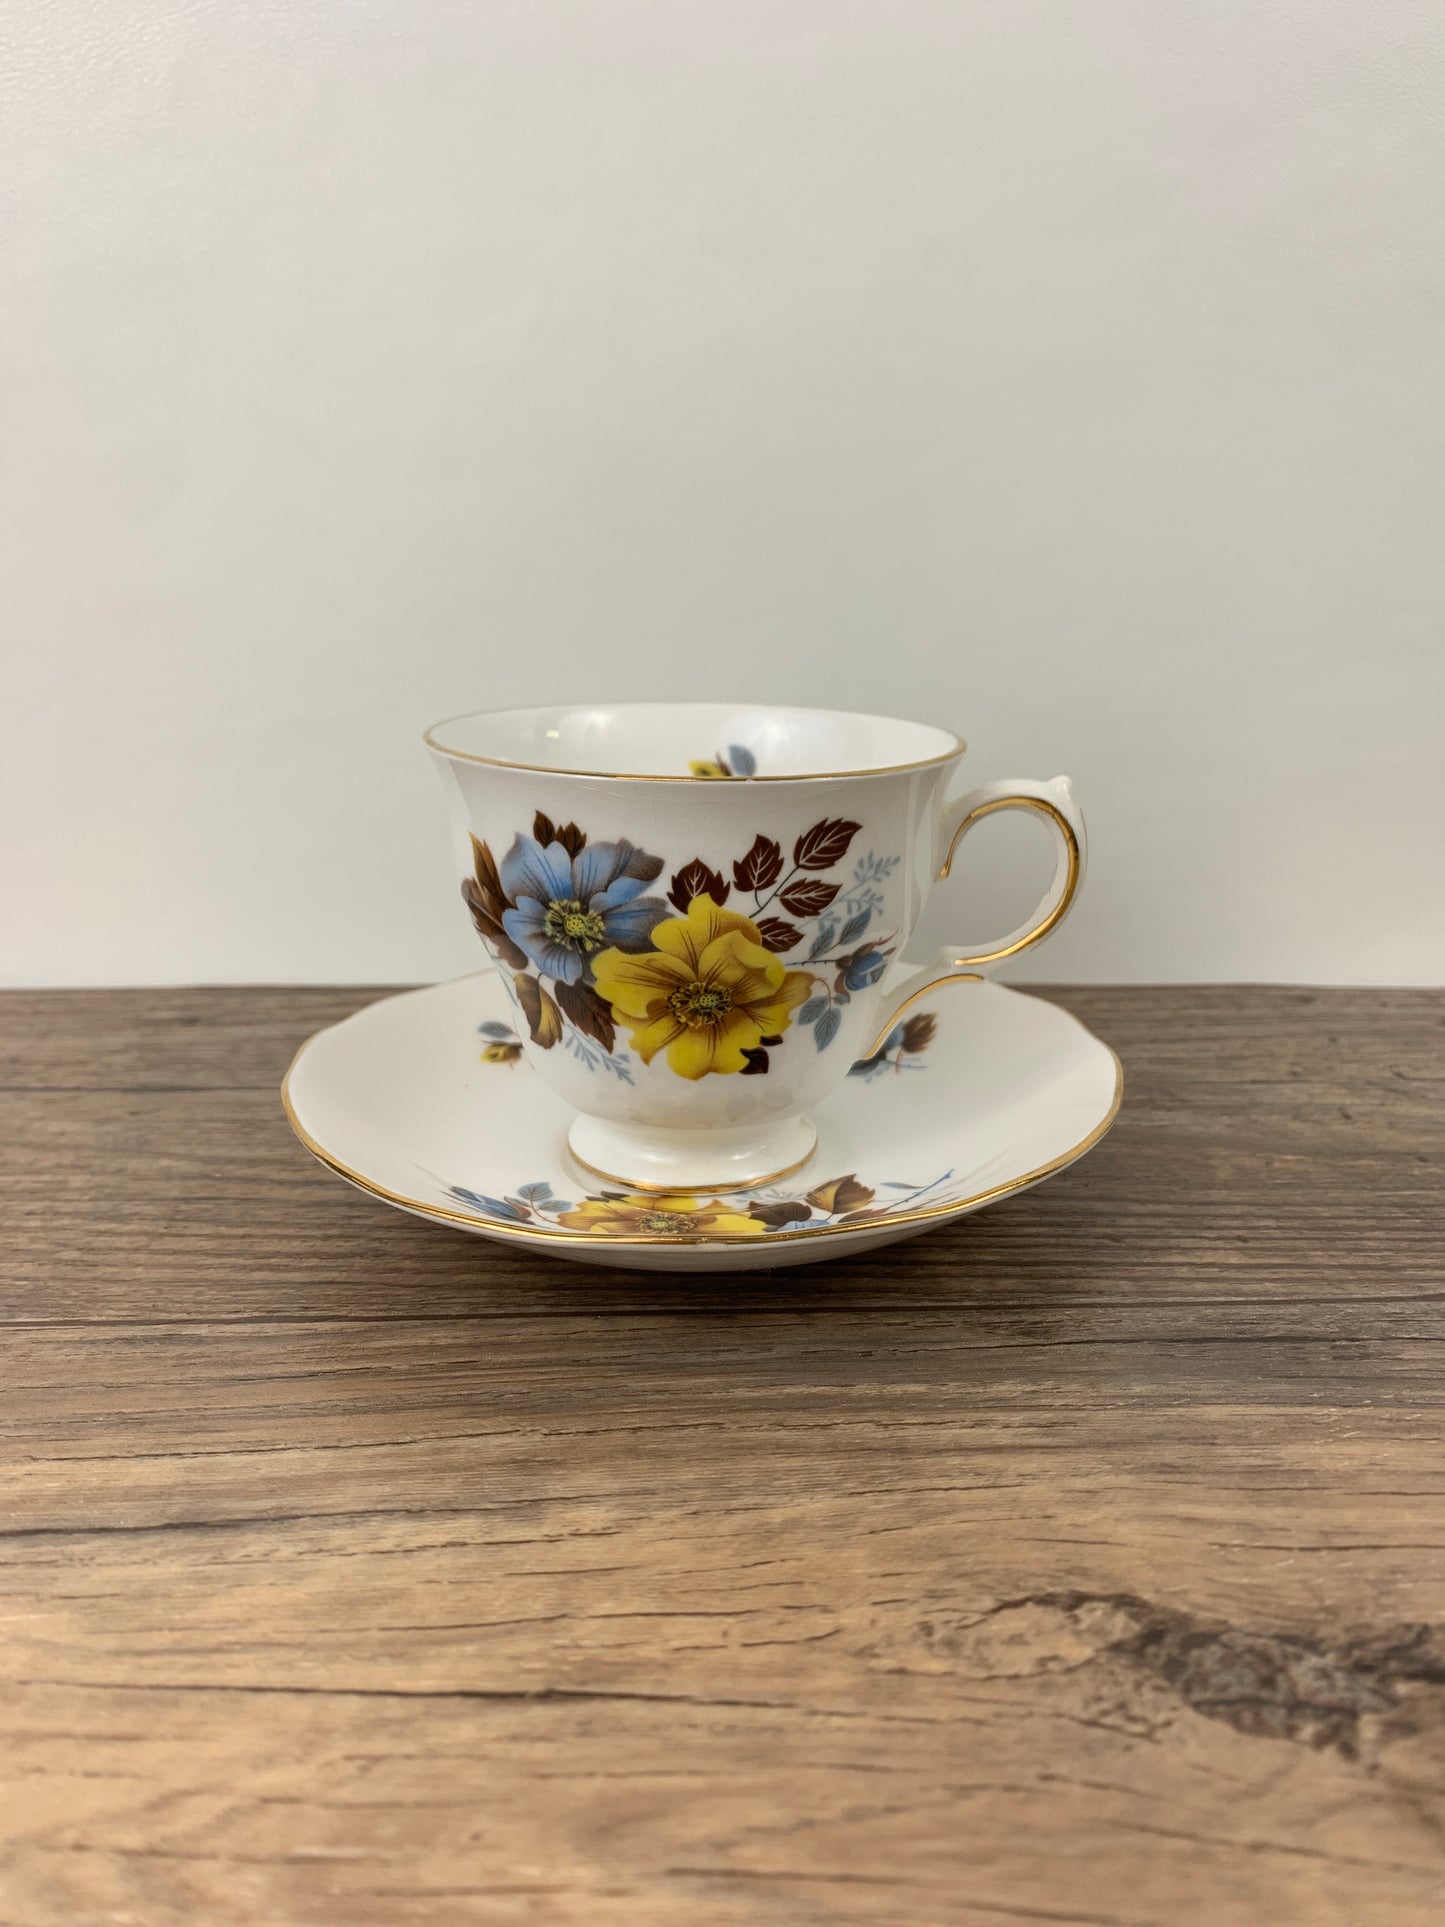 Vintage Floral Teacup Yellow and Blue Pattern Royal Vale Vintage English Tea Cup